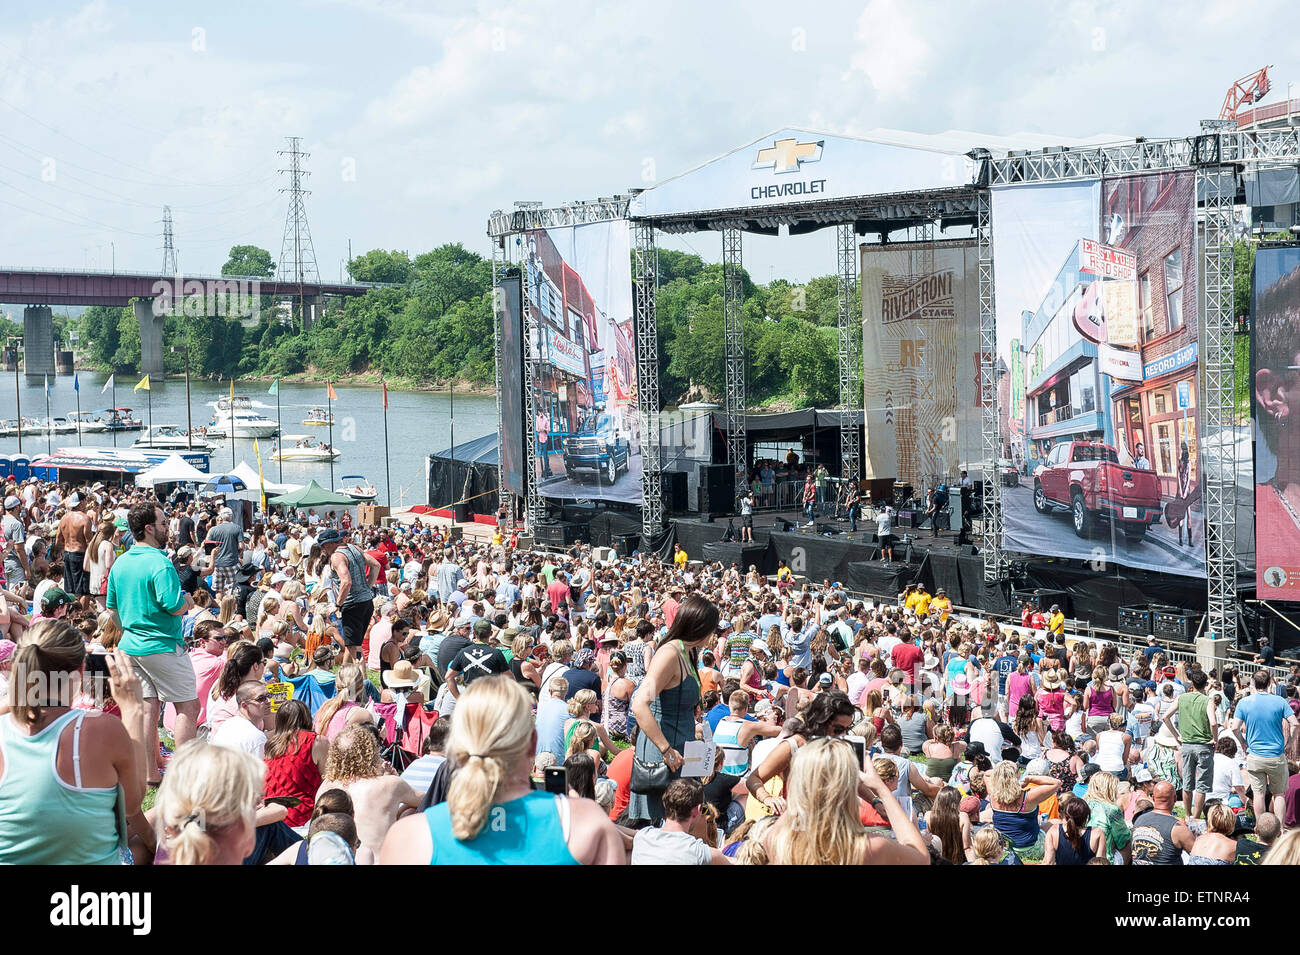 Jun. 13, 2015 - Nashville, Tennessee; USA - General Atmosphere while the band Parmalee performs at The River Front Stage as part of the 2015 CMA Music Festival that is taking place in downtown Nashville. The four day country music festival will attract thousands of fans from around the world to see a variety of artist on multiple stages. Copyright 2015 Jason Moore. © Jason Moore/ZUMA Wire/Alamy Live News Stock Photo